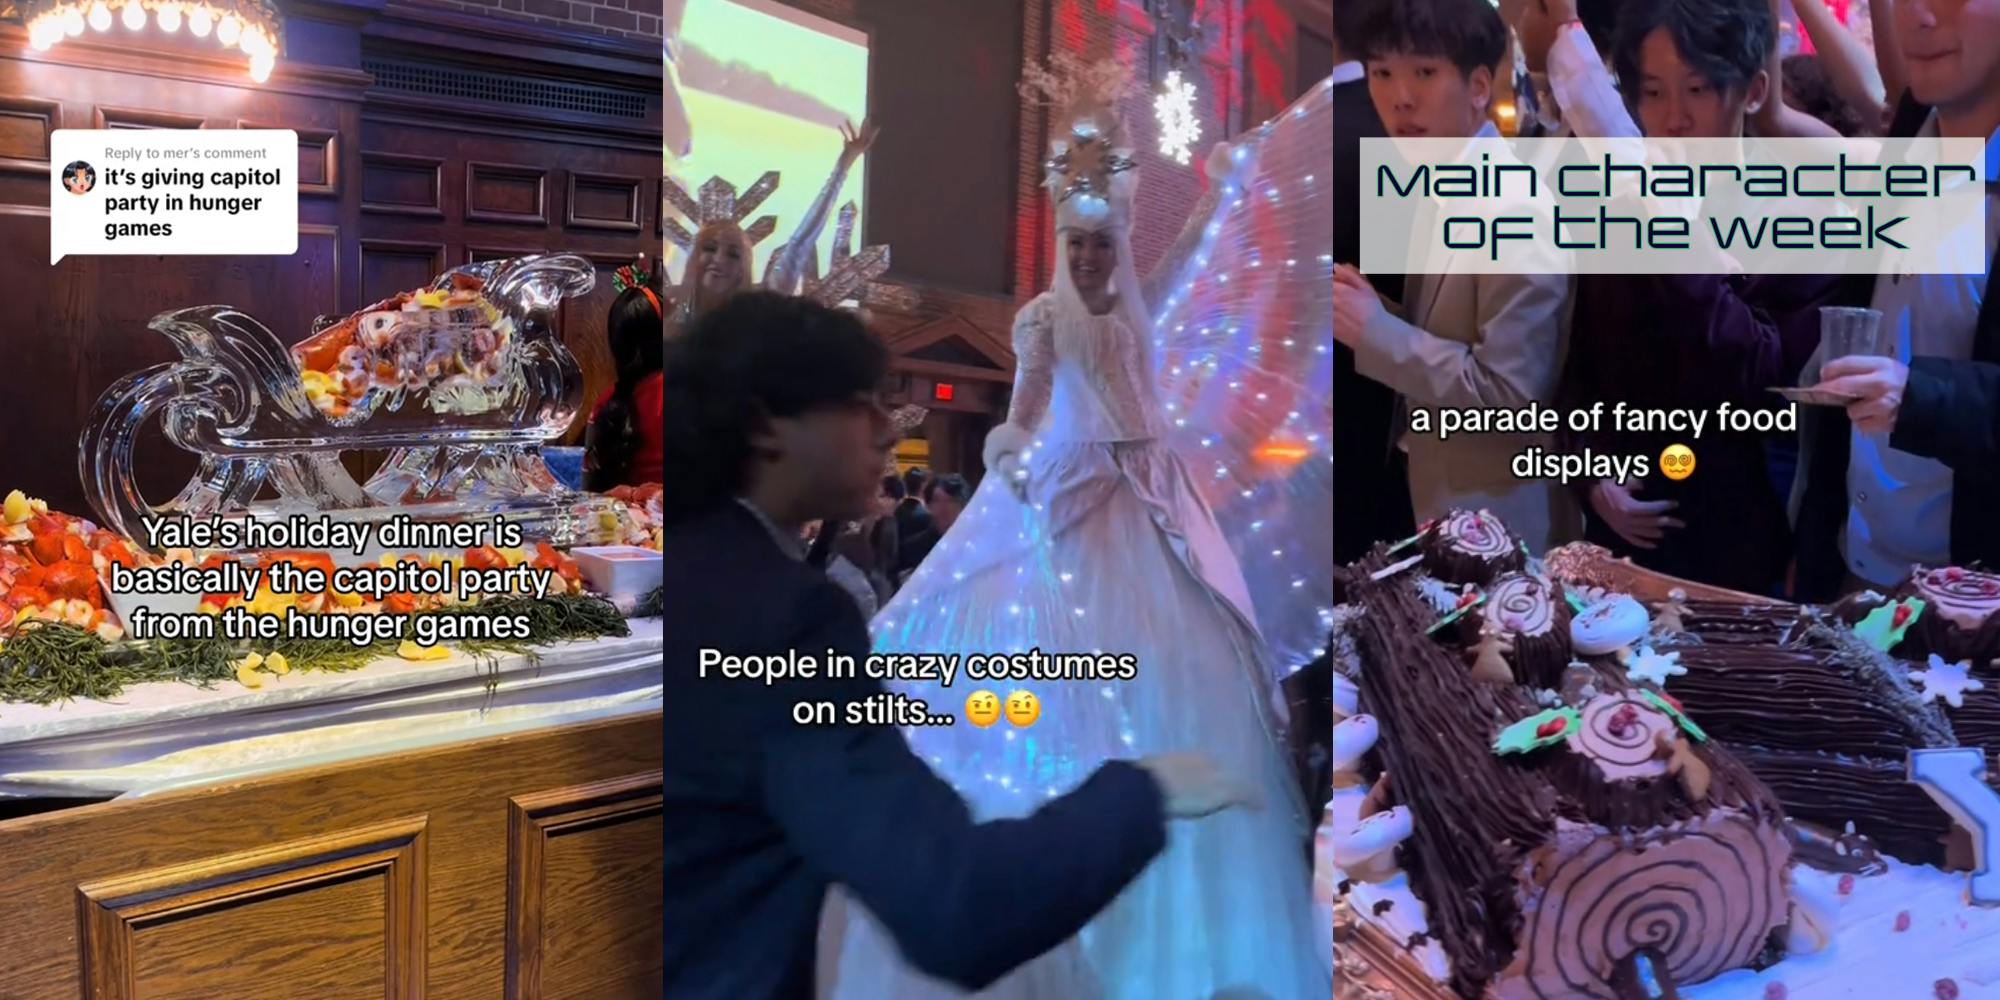 Screenshots from a TikTok showing Yale holiday party. In the top right corner is text that says 'Main Character of the Week' in a Daily Dot newsletter web_crawlr font.